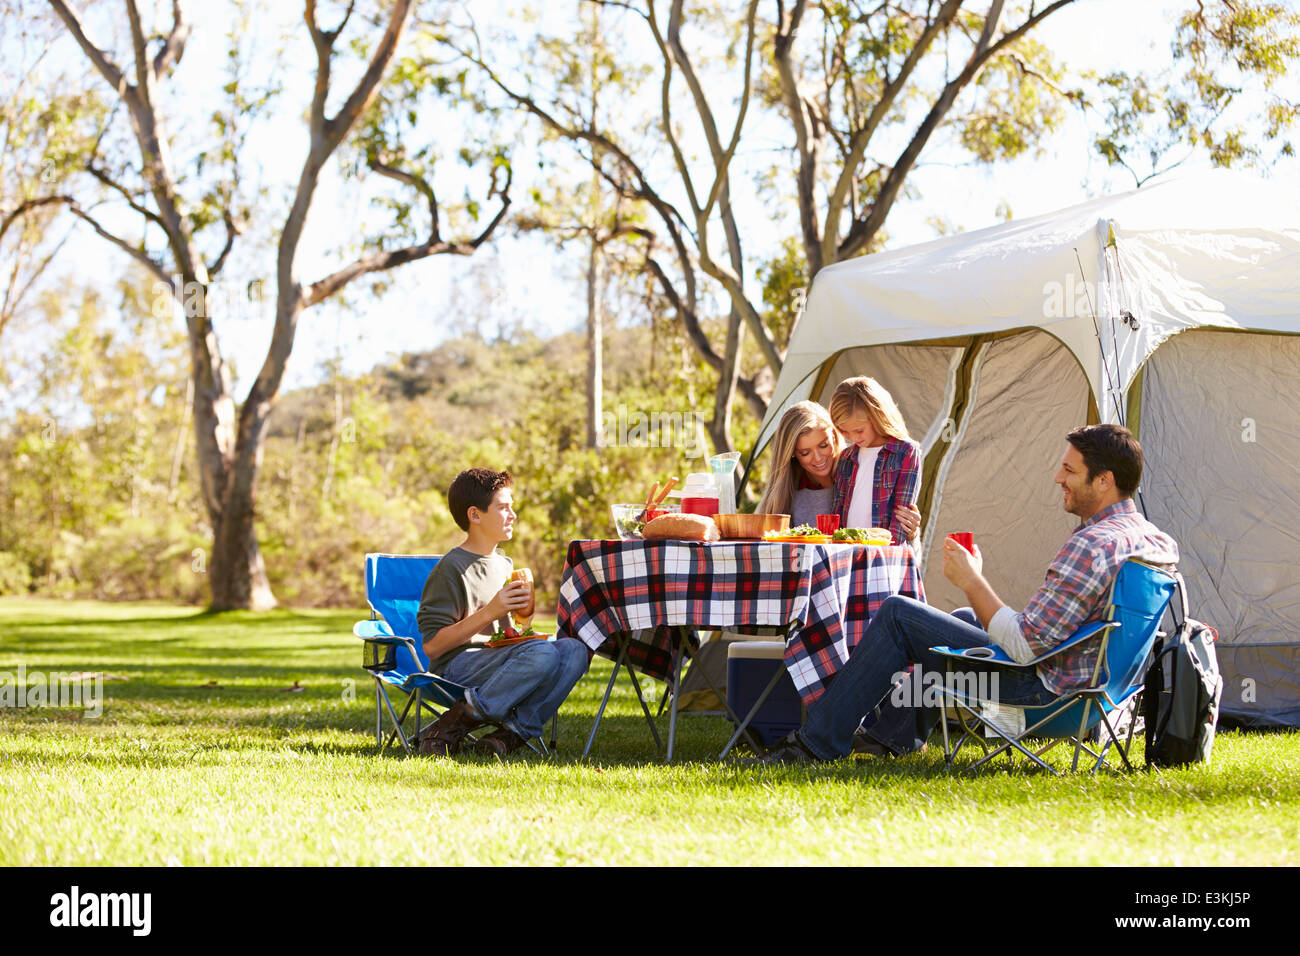 Family Enjoying Camping Holiday In Countryside Stock Photo